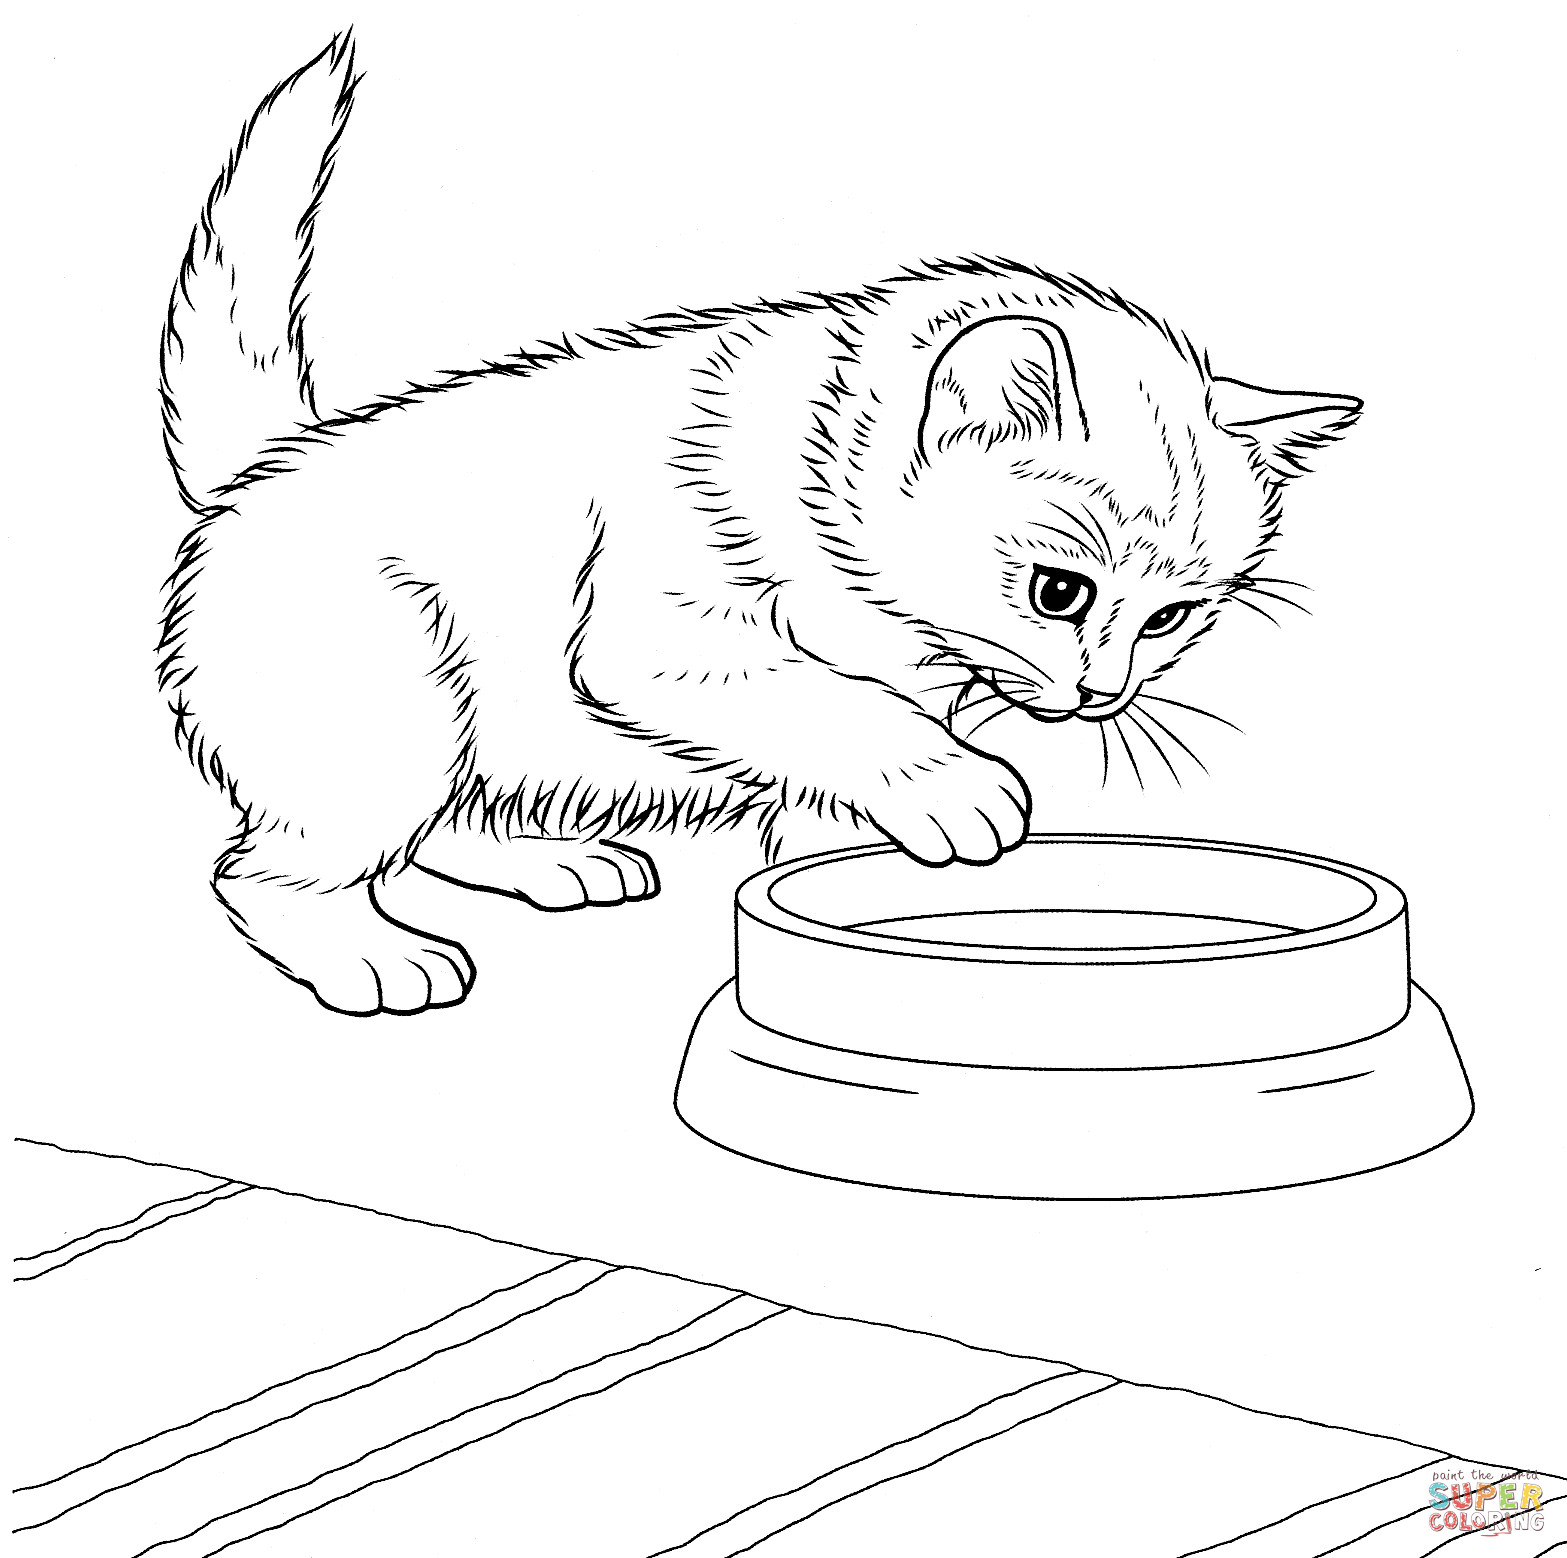 Real Kitten Coloring Sheets For Girls
 Javanese Kitten coloring page